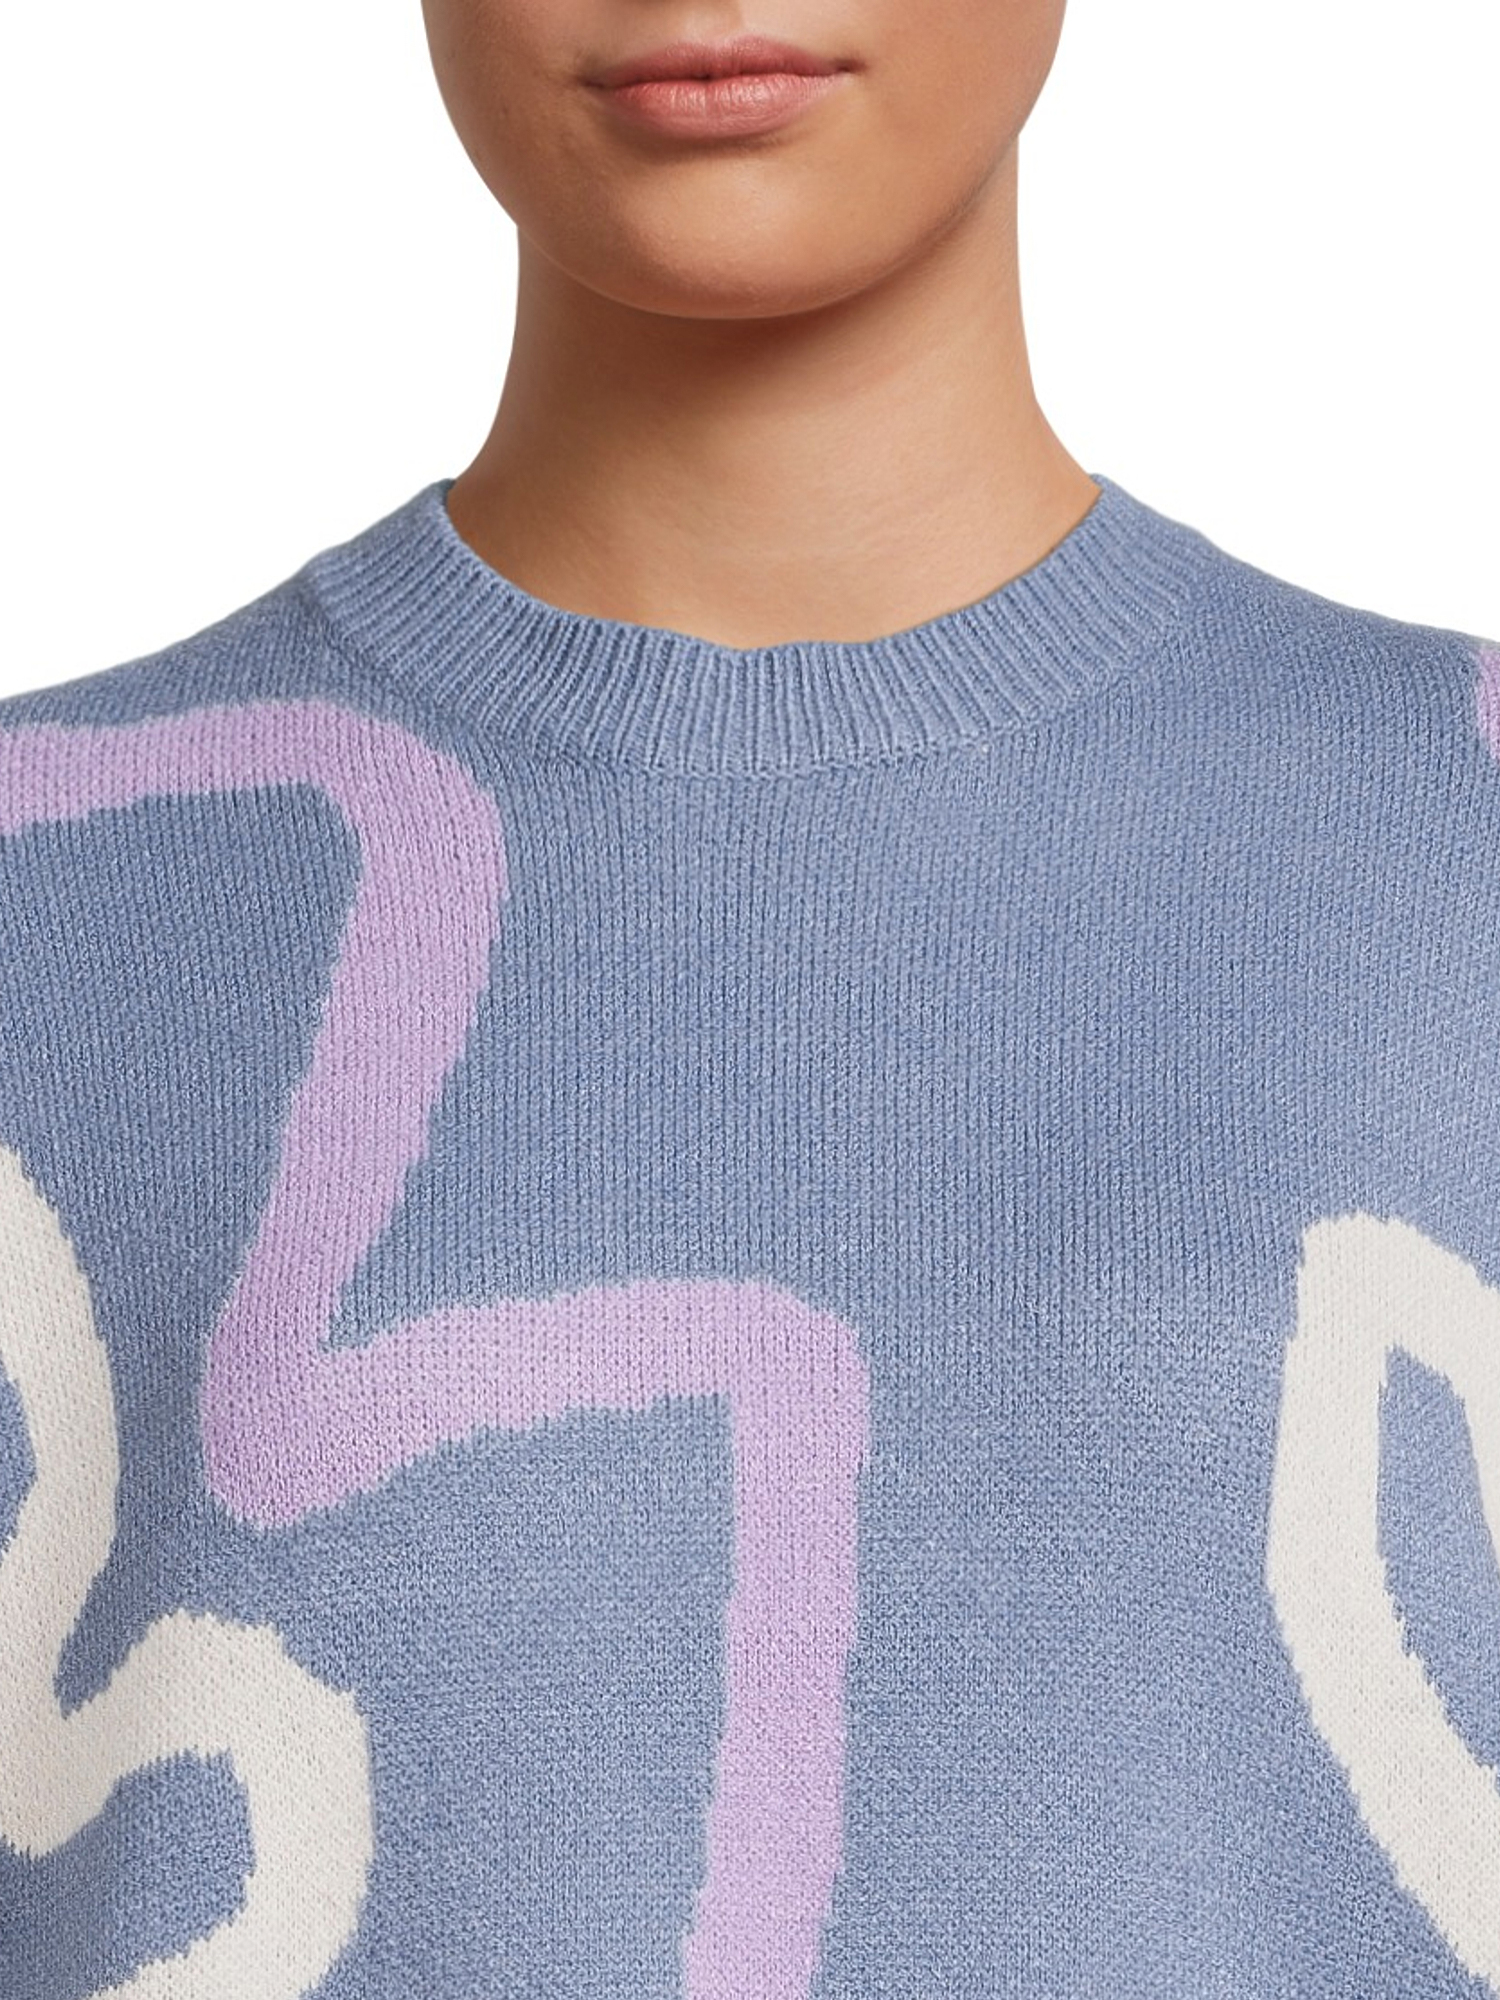 Dreamers by Debut Womens Print Pullover Long Sleeve Sweater - image 4 of 5